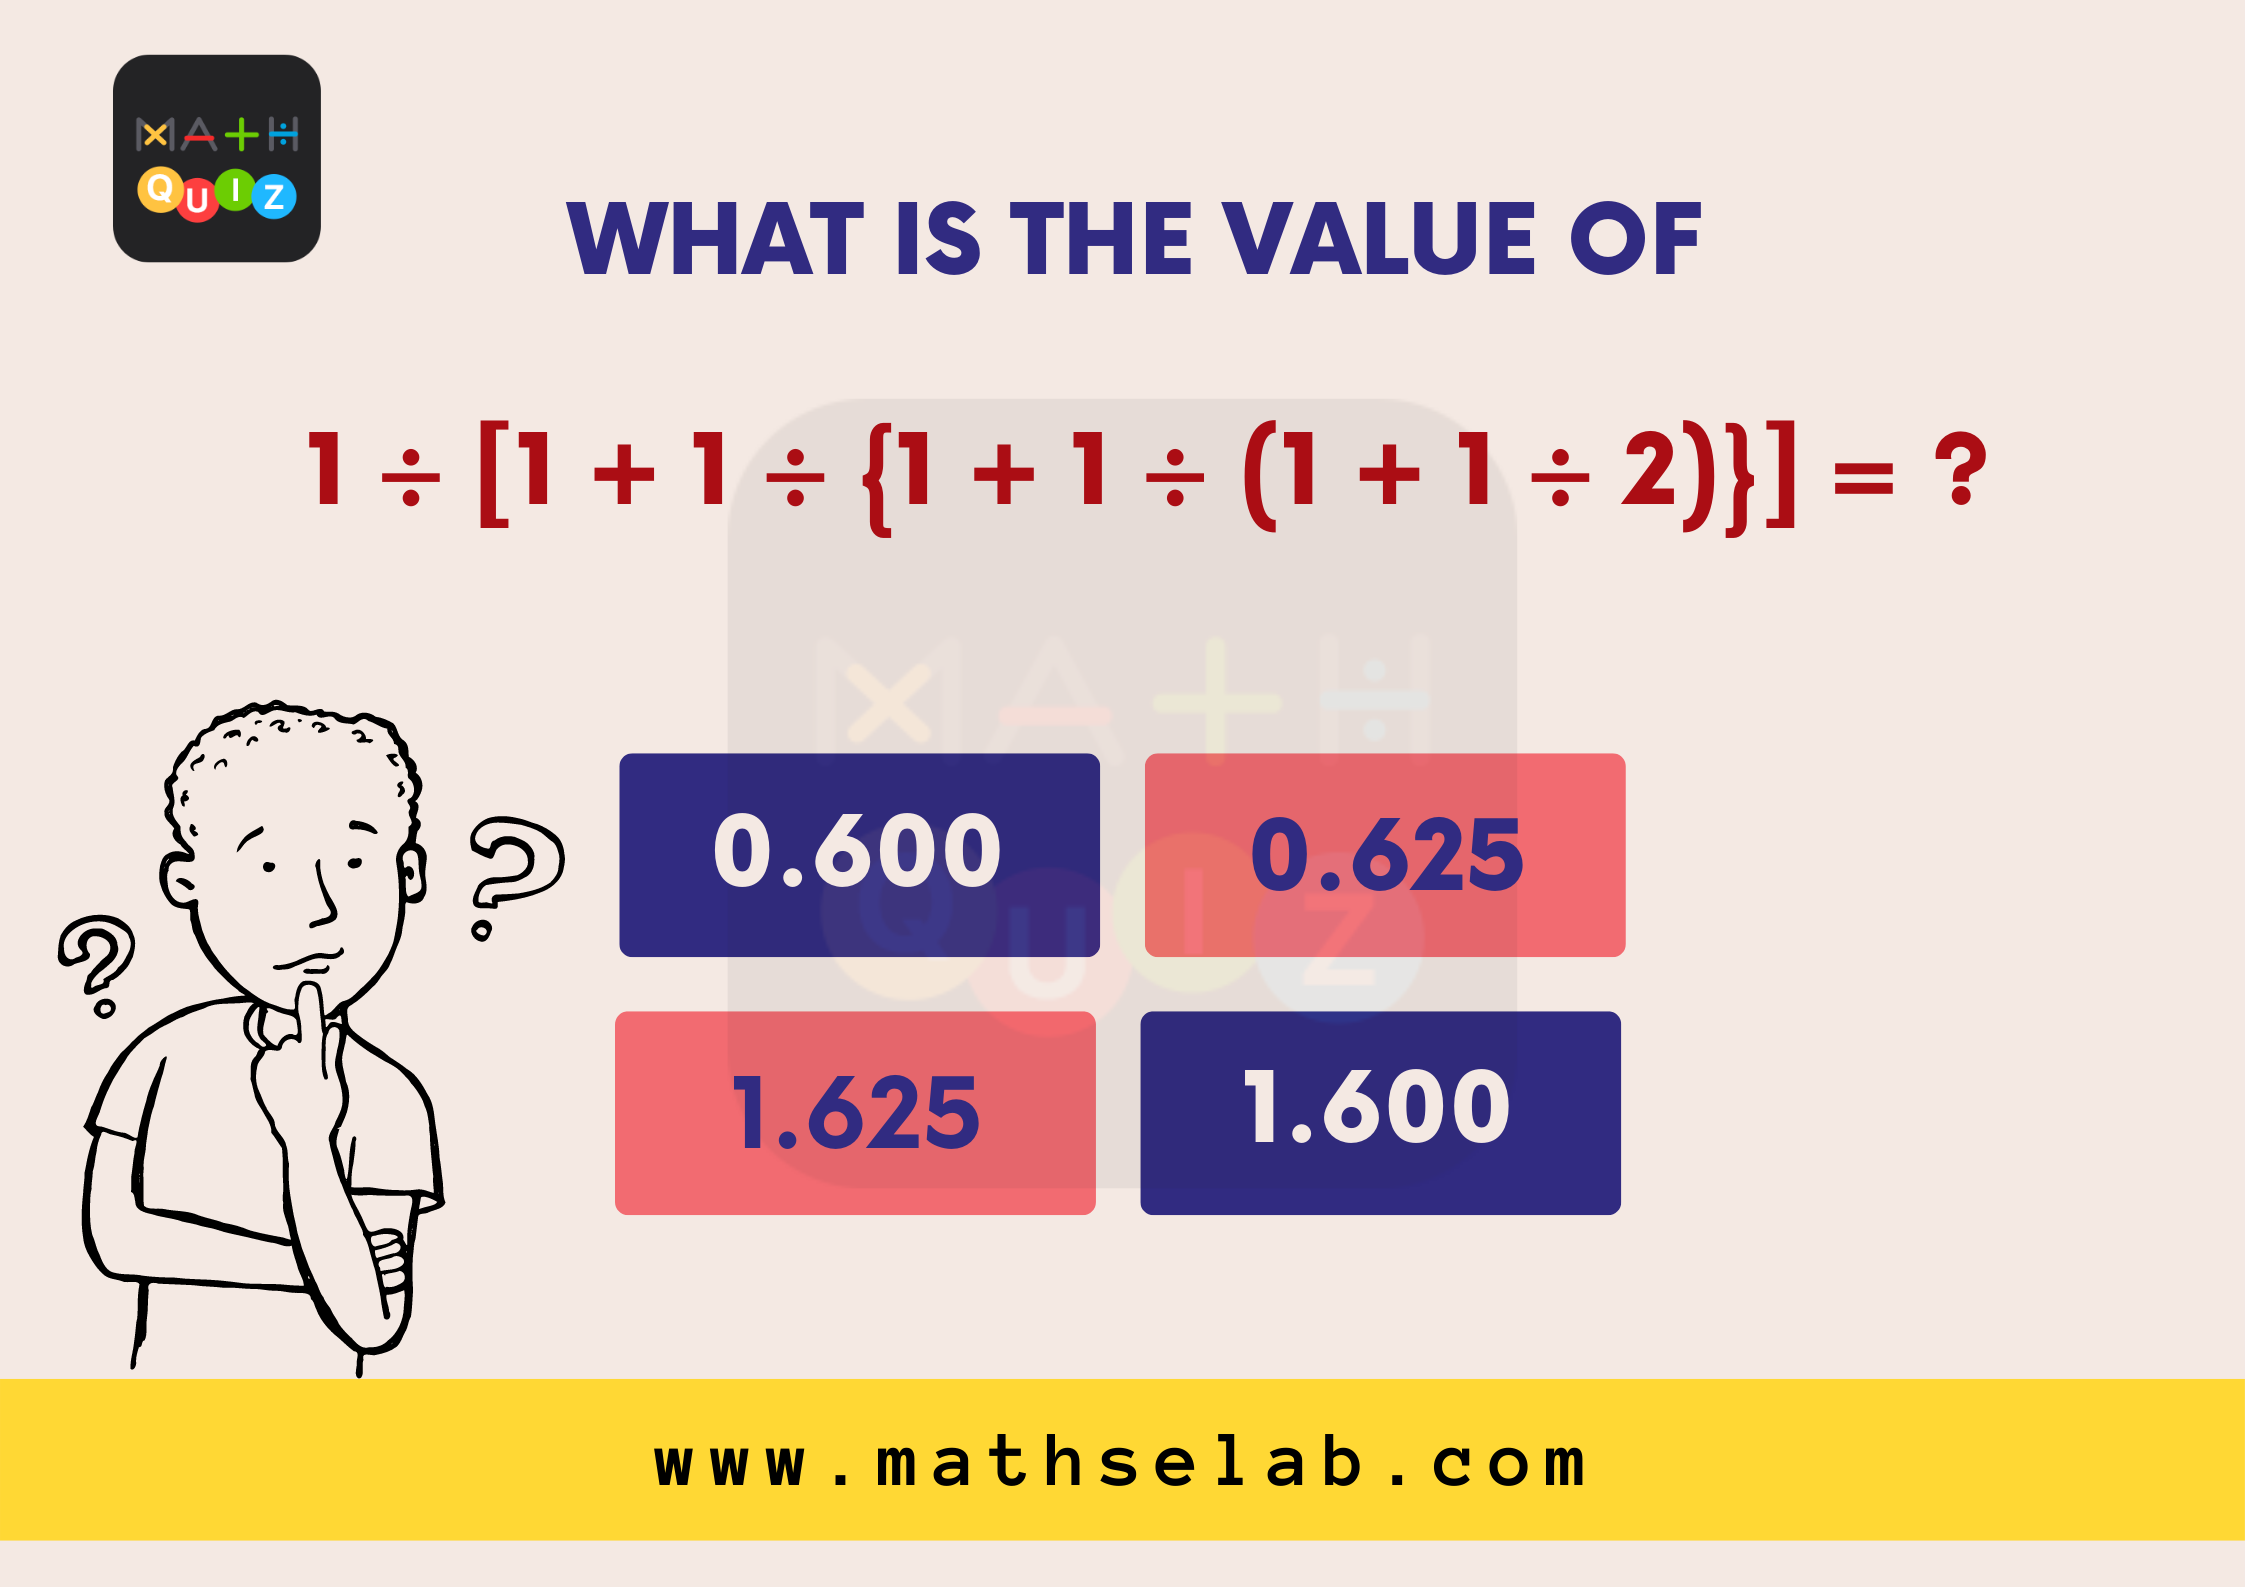 What is the value of 1 ÷ [1 + 1 ÷ {1 + 1 ÷ (1 + 1 ÷ 2)}] = - mathselab.com